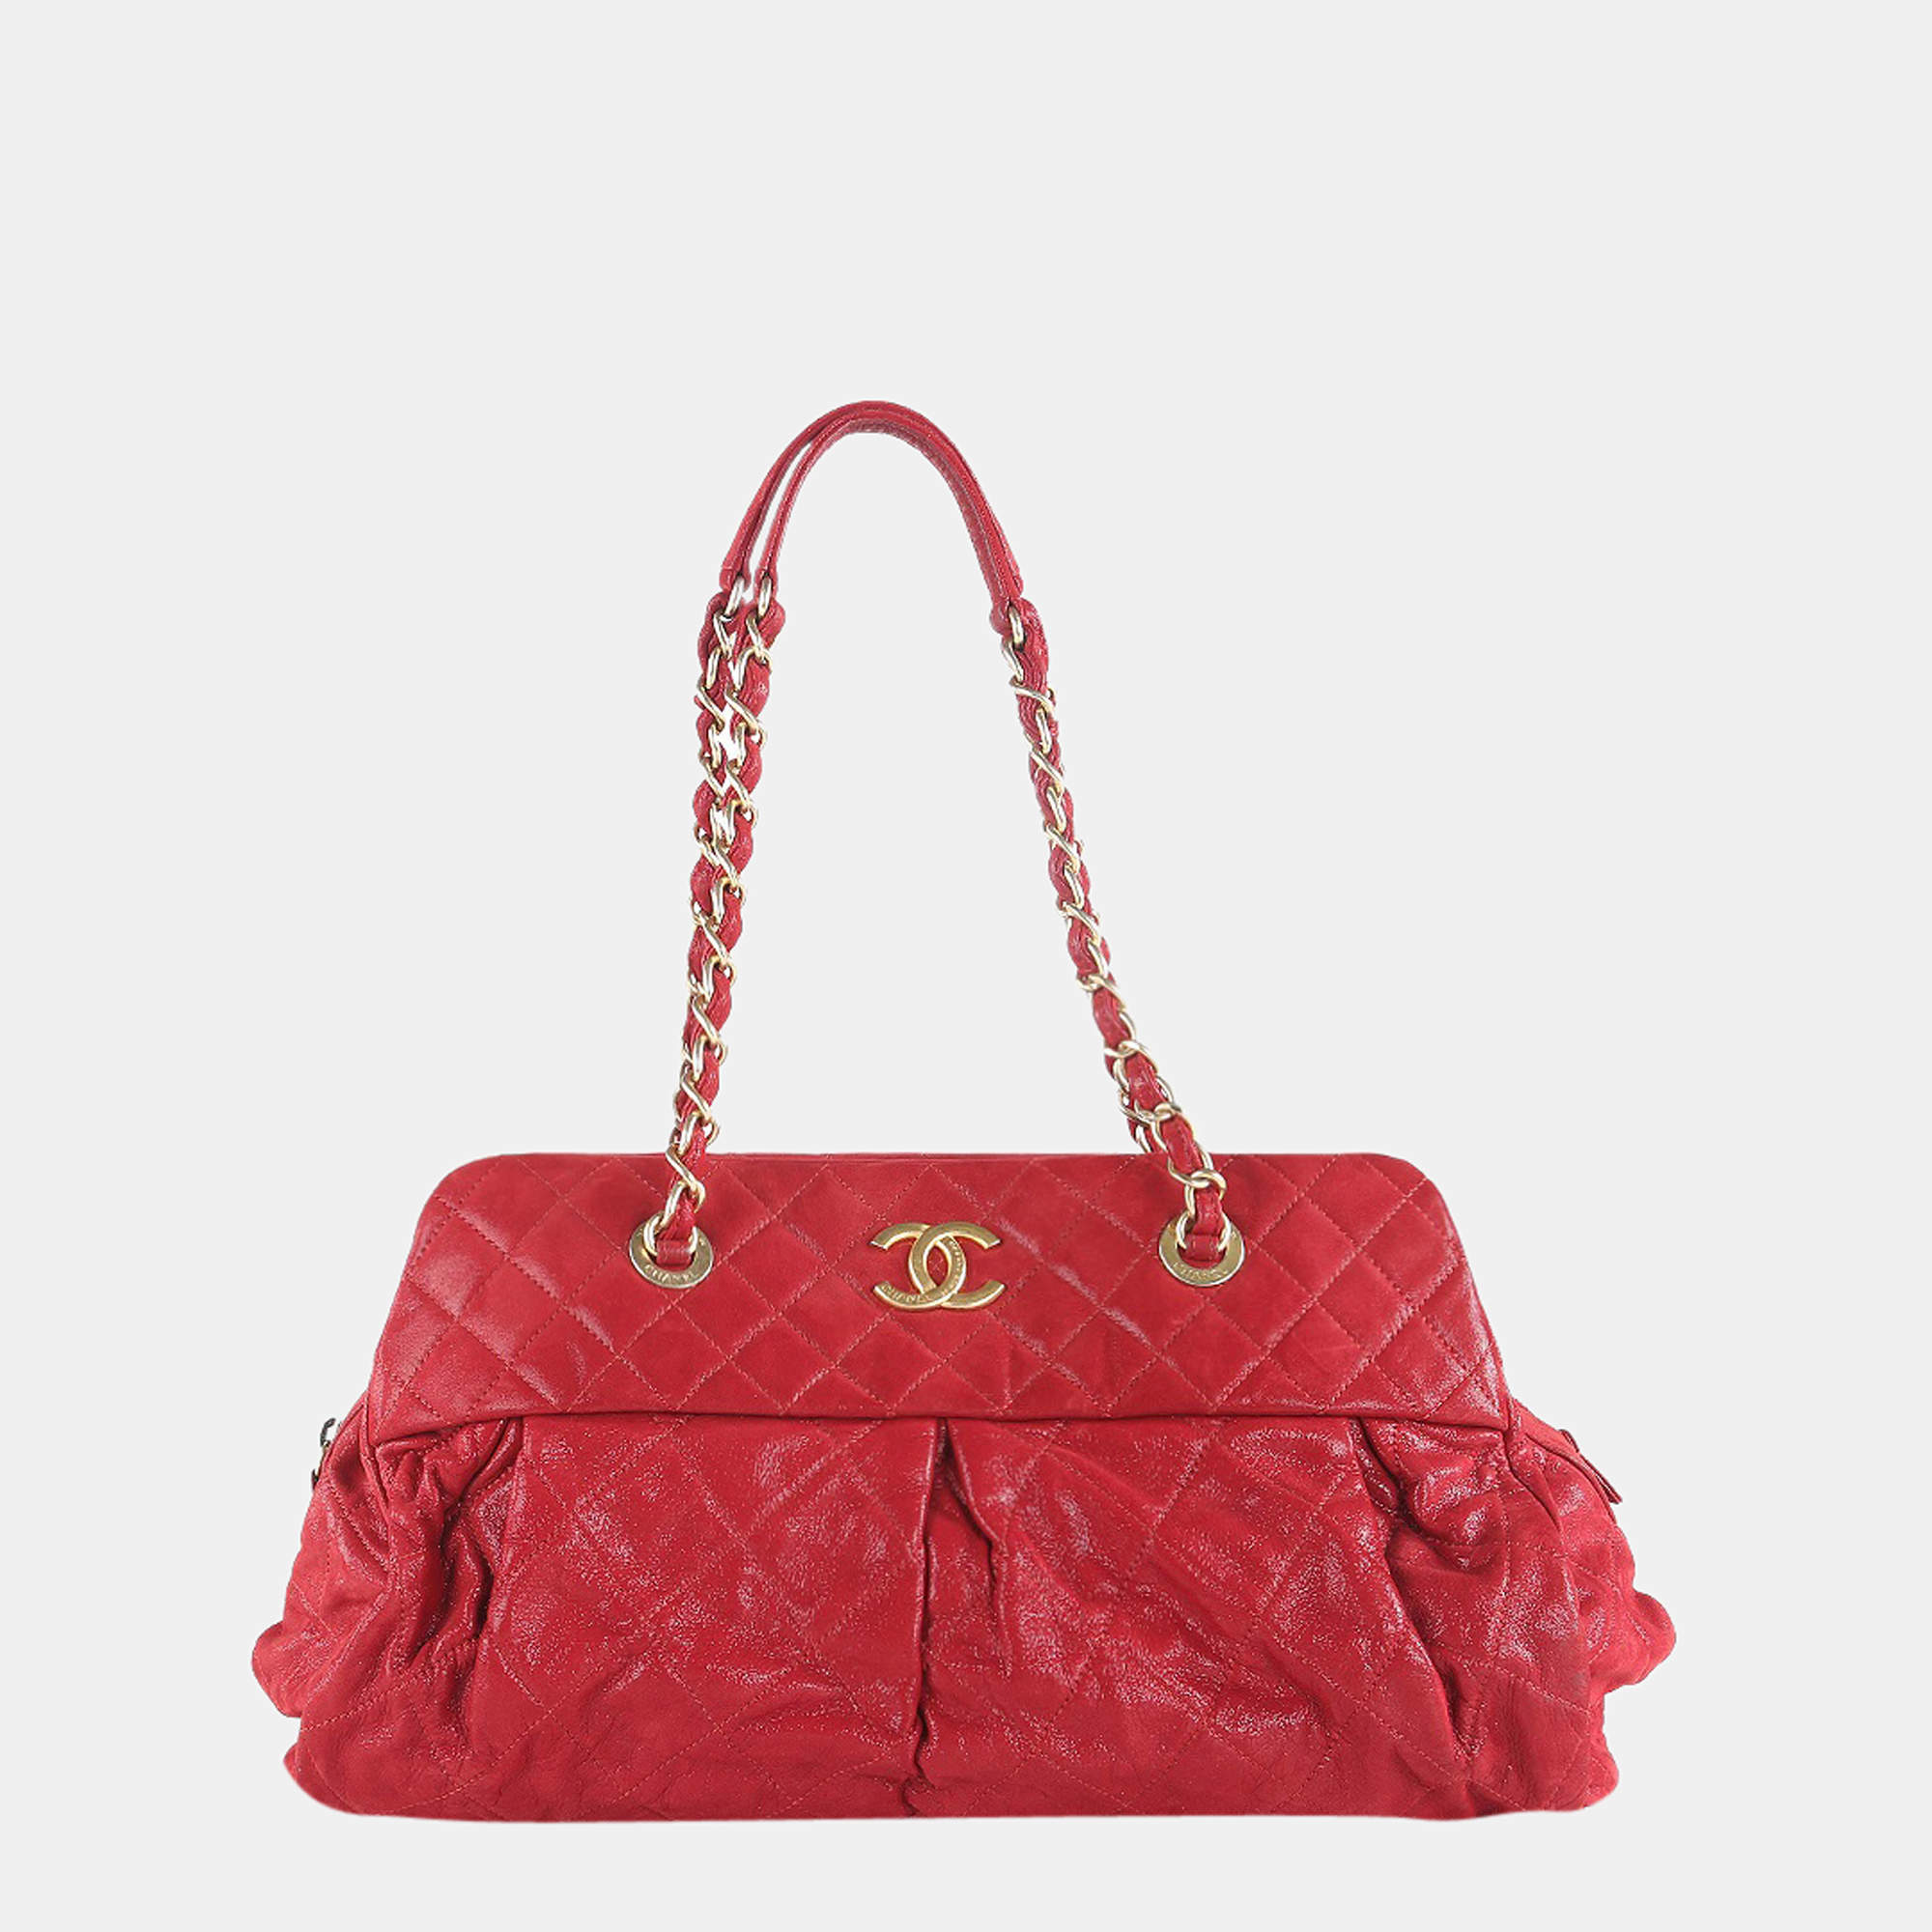 Chanel Shiny Red Quilted Leather Shoulder Bag Chanel